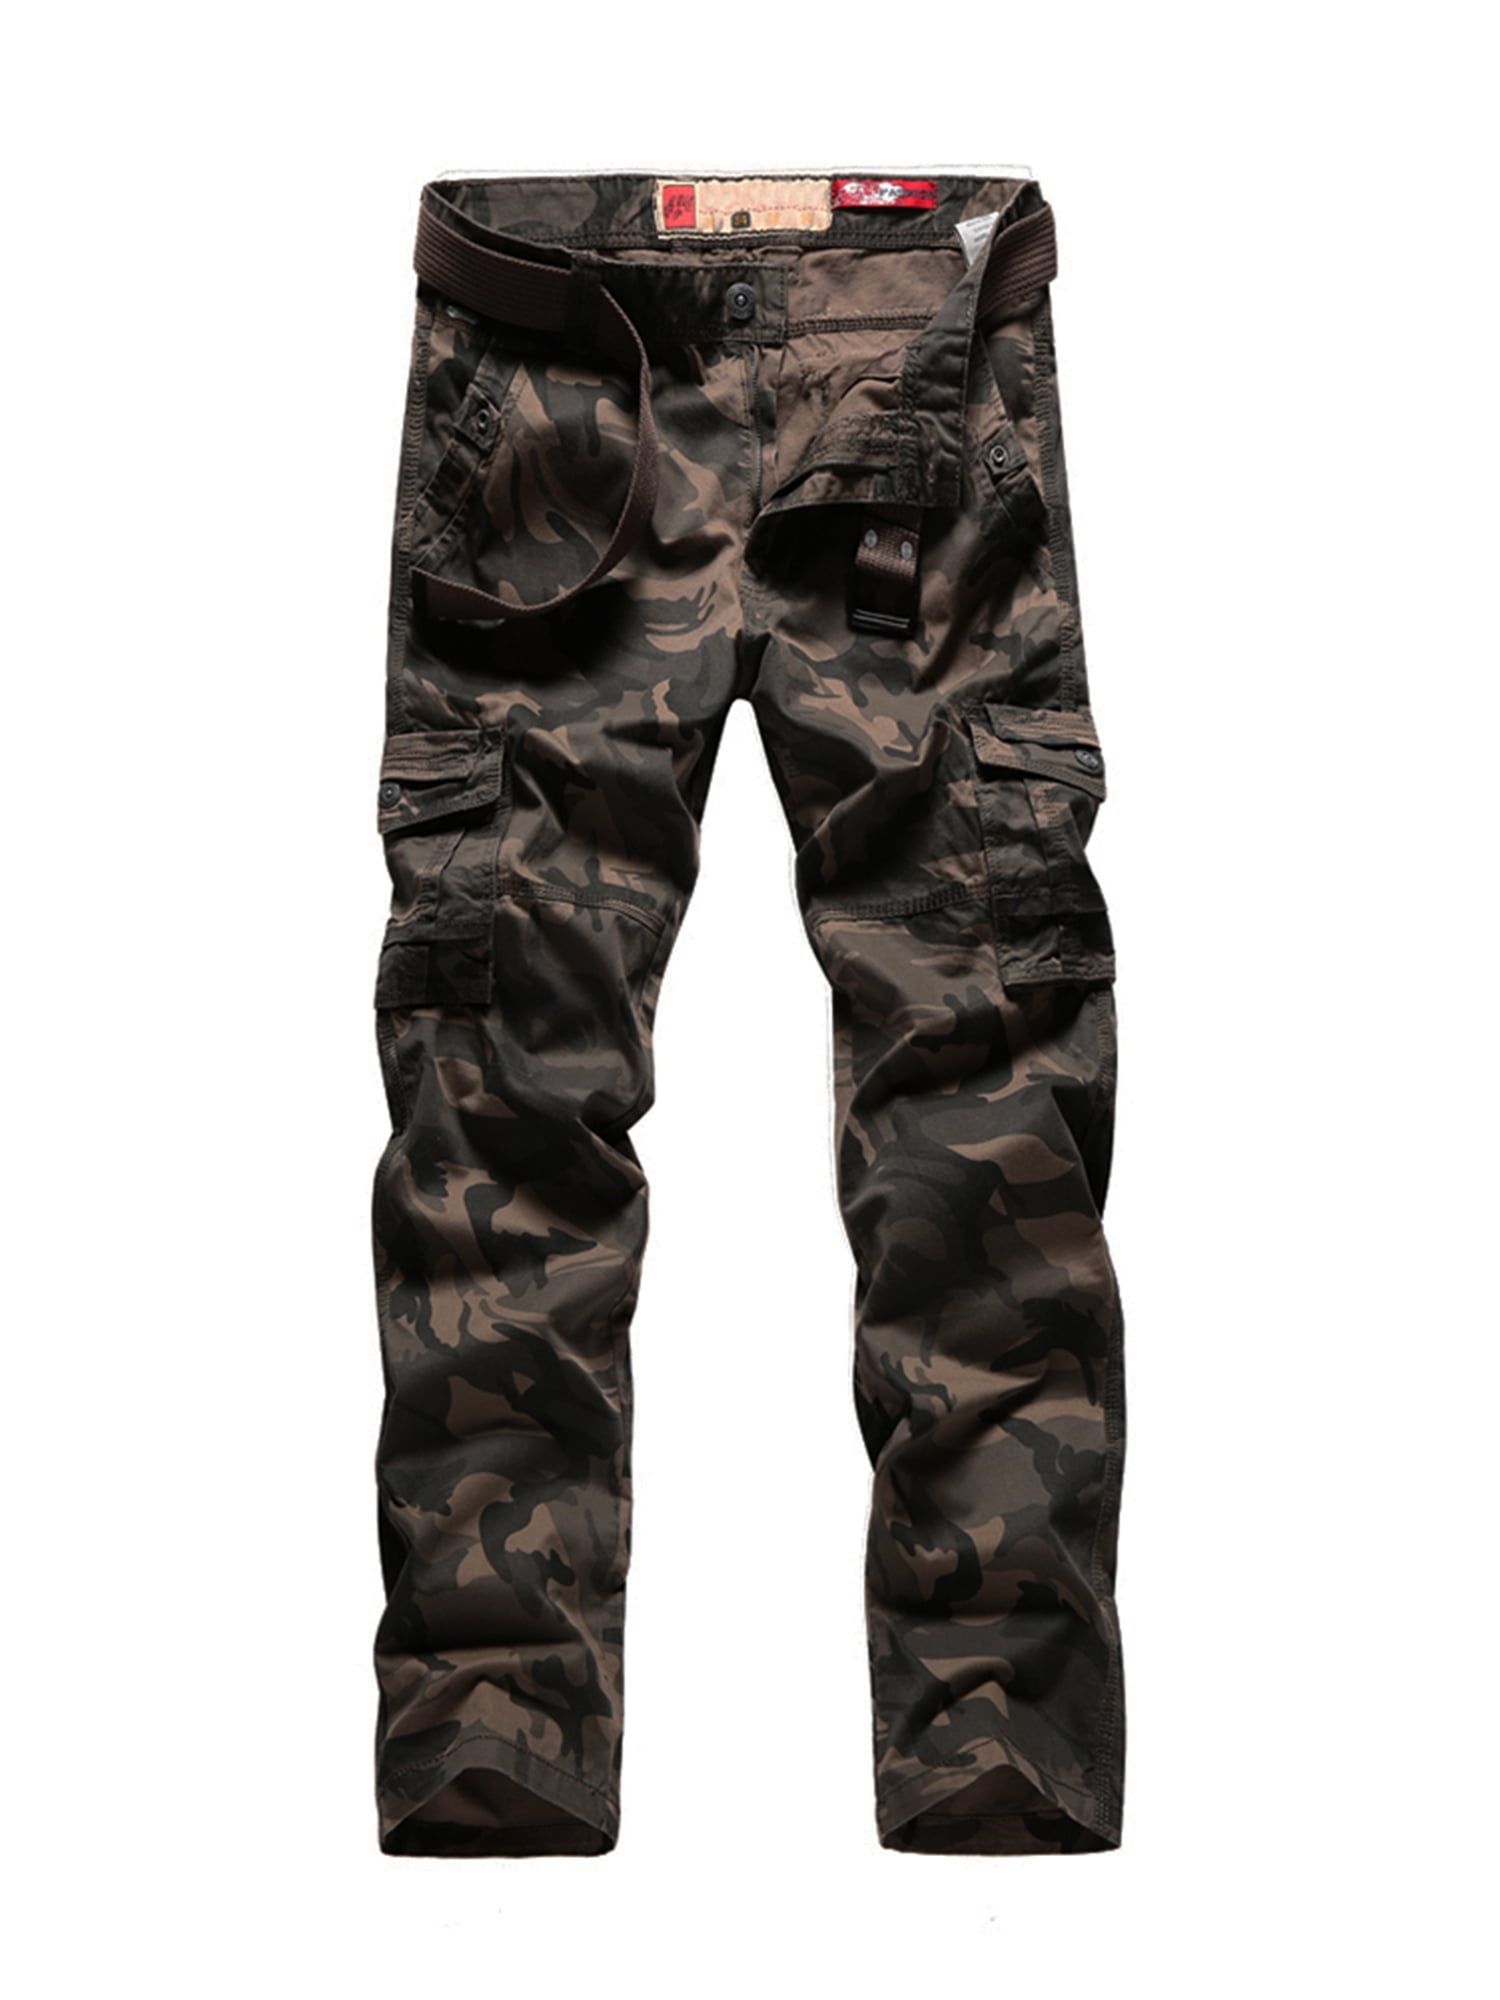 Mens Combat Military Army Camouflage Cargo Camo Trousers Pants Casual Work Sizes